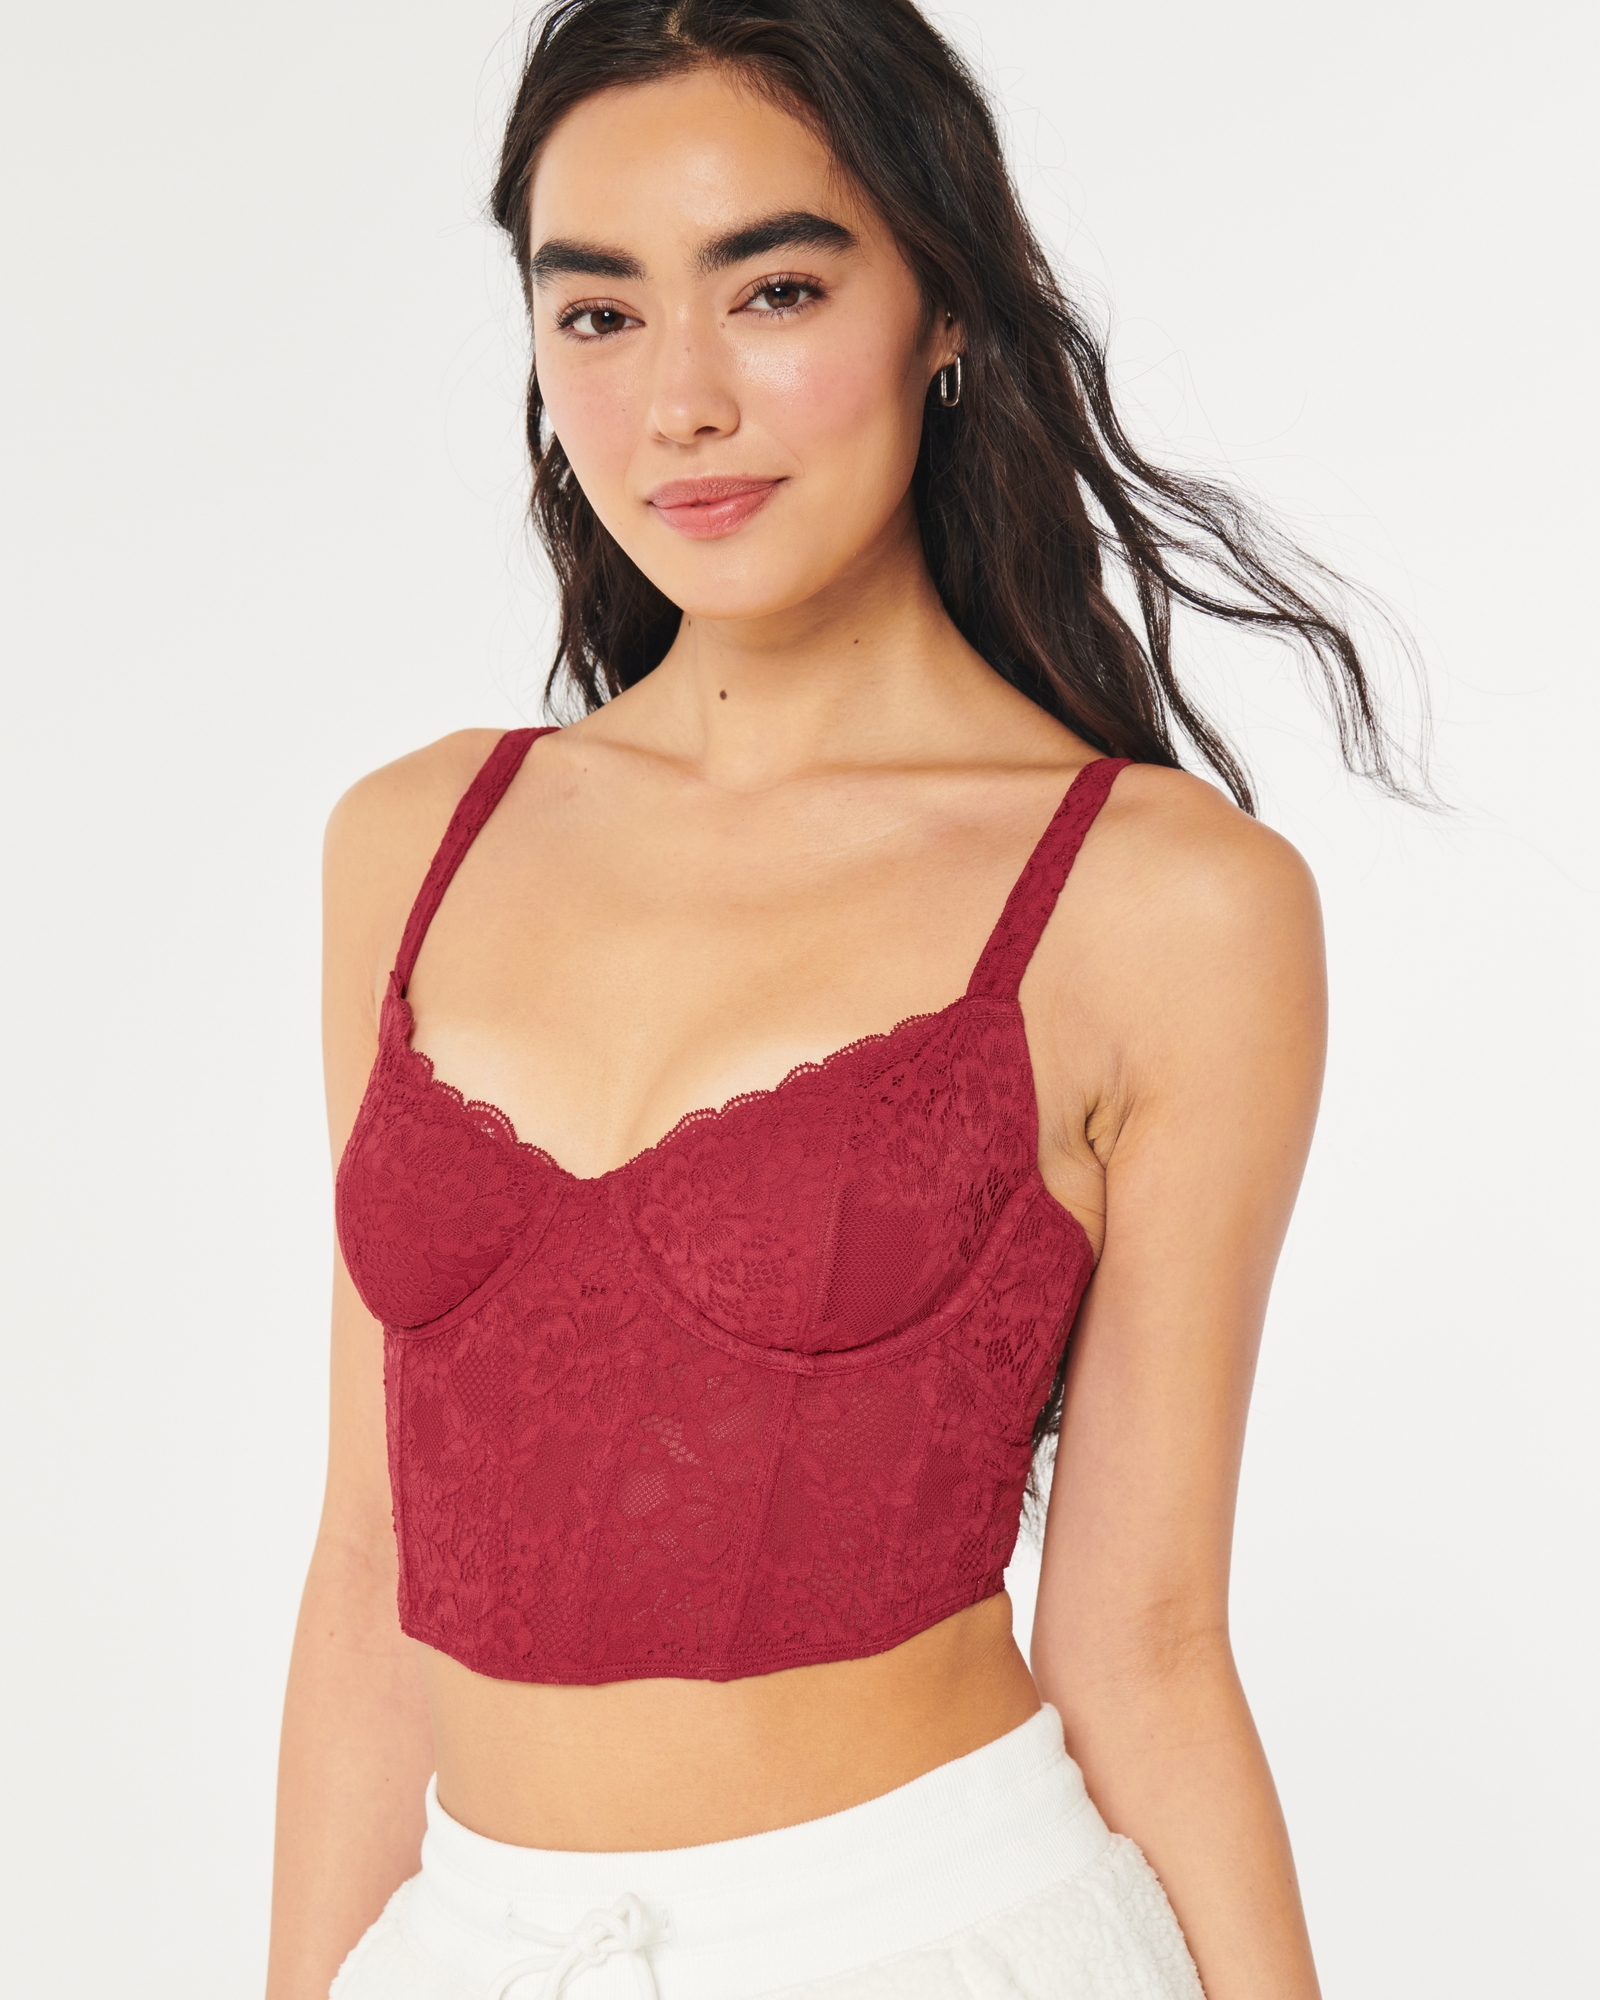 hollister gilly hicks red lace bralette top. comes